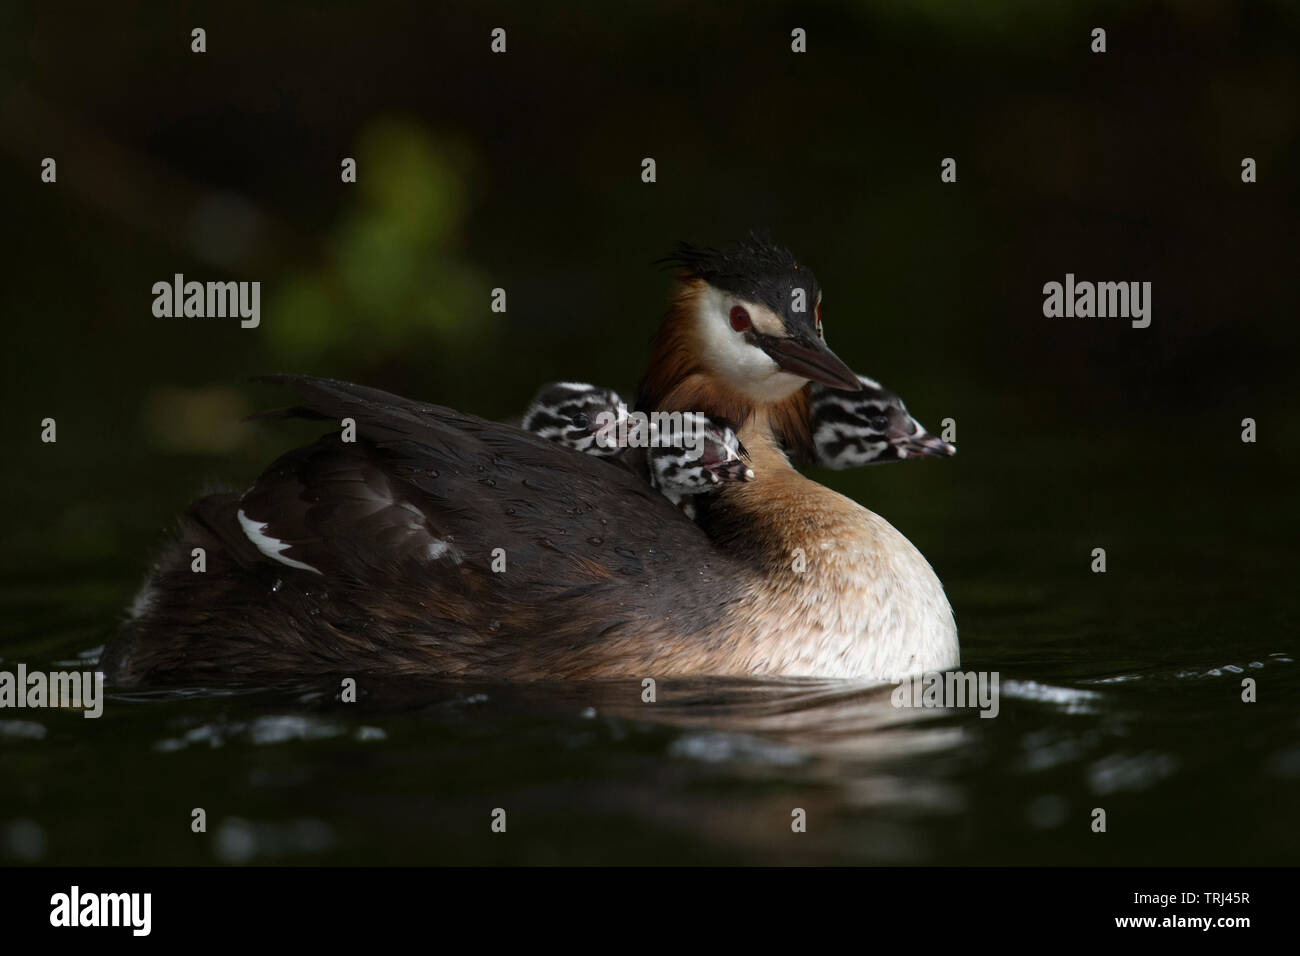 Great Crested Grebes / Haubentaucher ( Podiceps cristatus ) carrying three chicks on its back, looks cute and funny, wildlife, Europe. Stock Photo